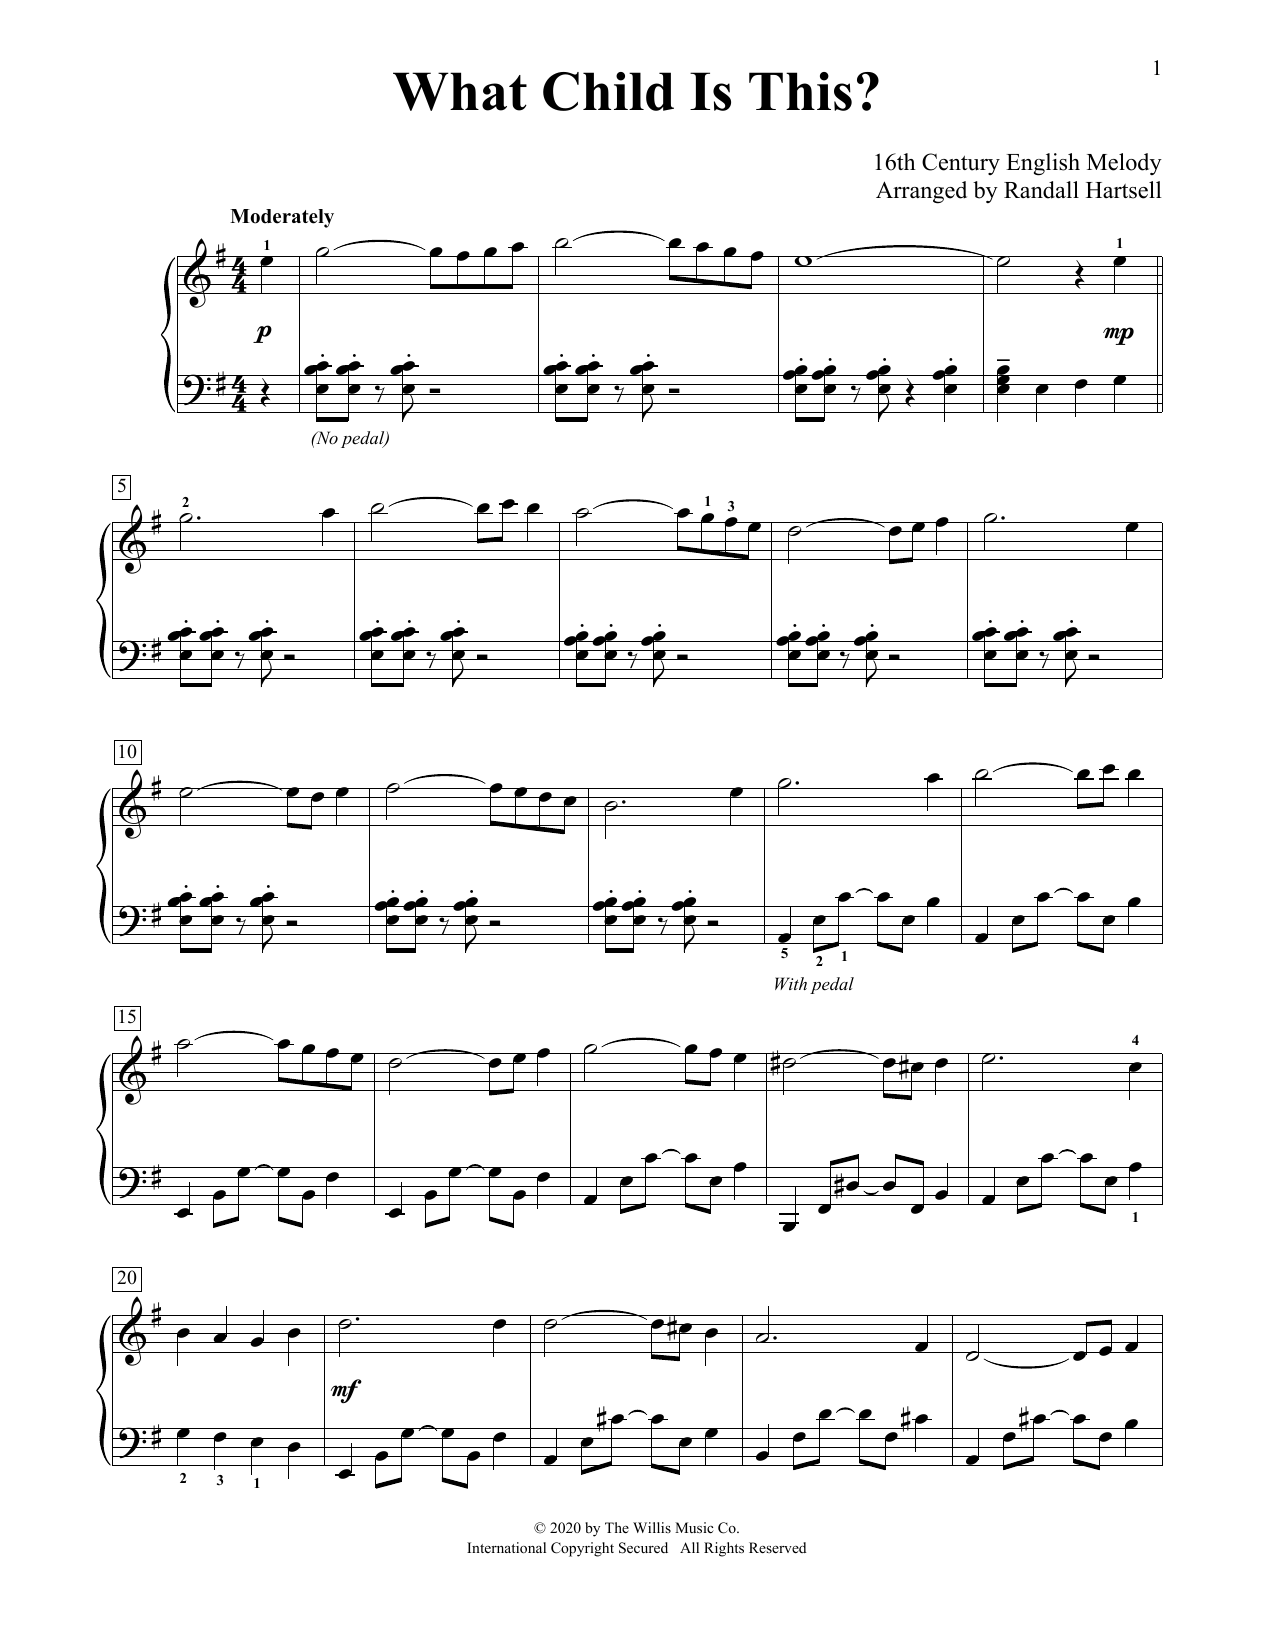 Download 16th Century English Melody What Child Is This? (arr. Randall Harts Sheet Music